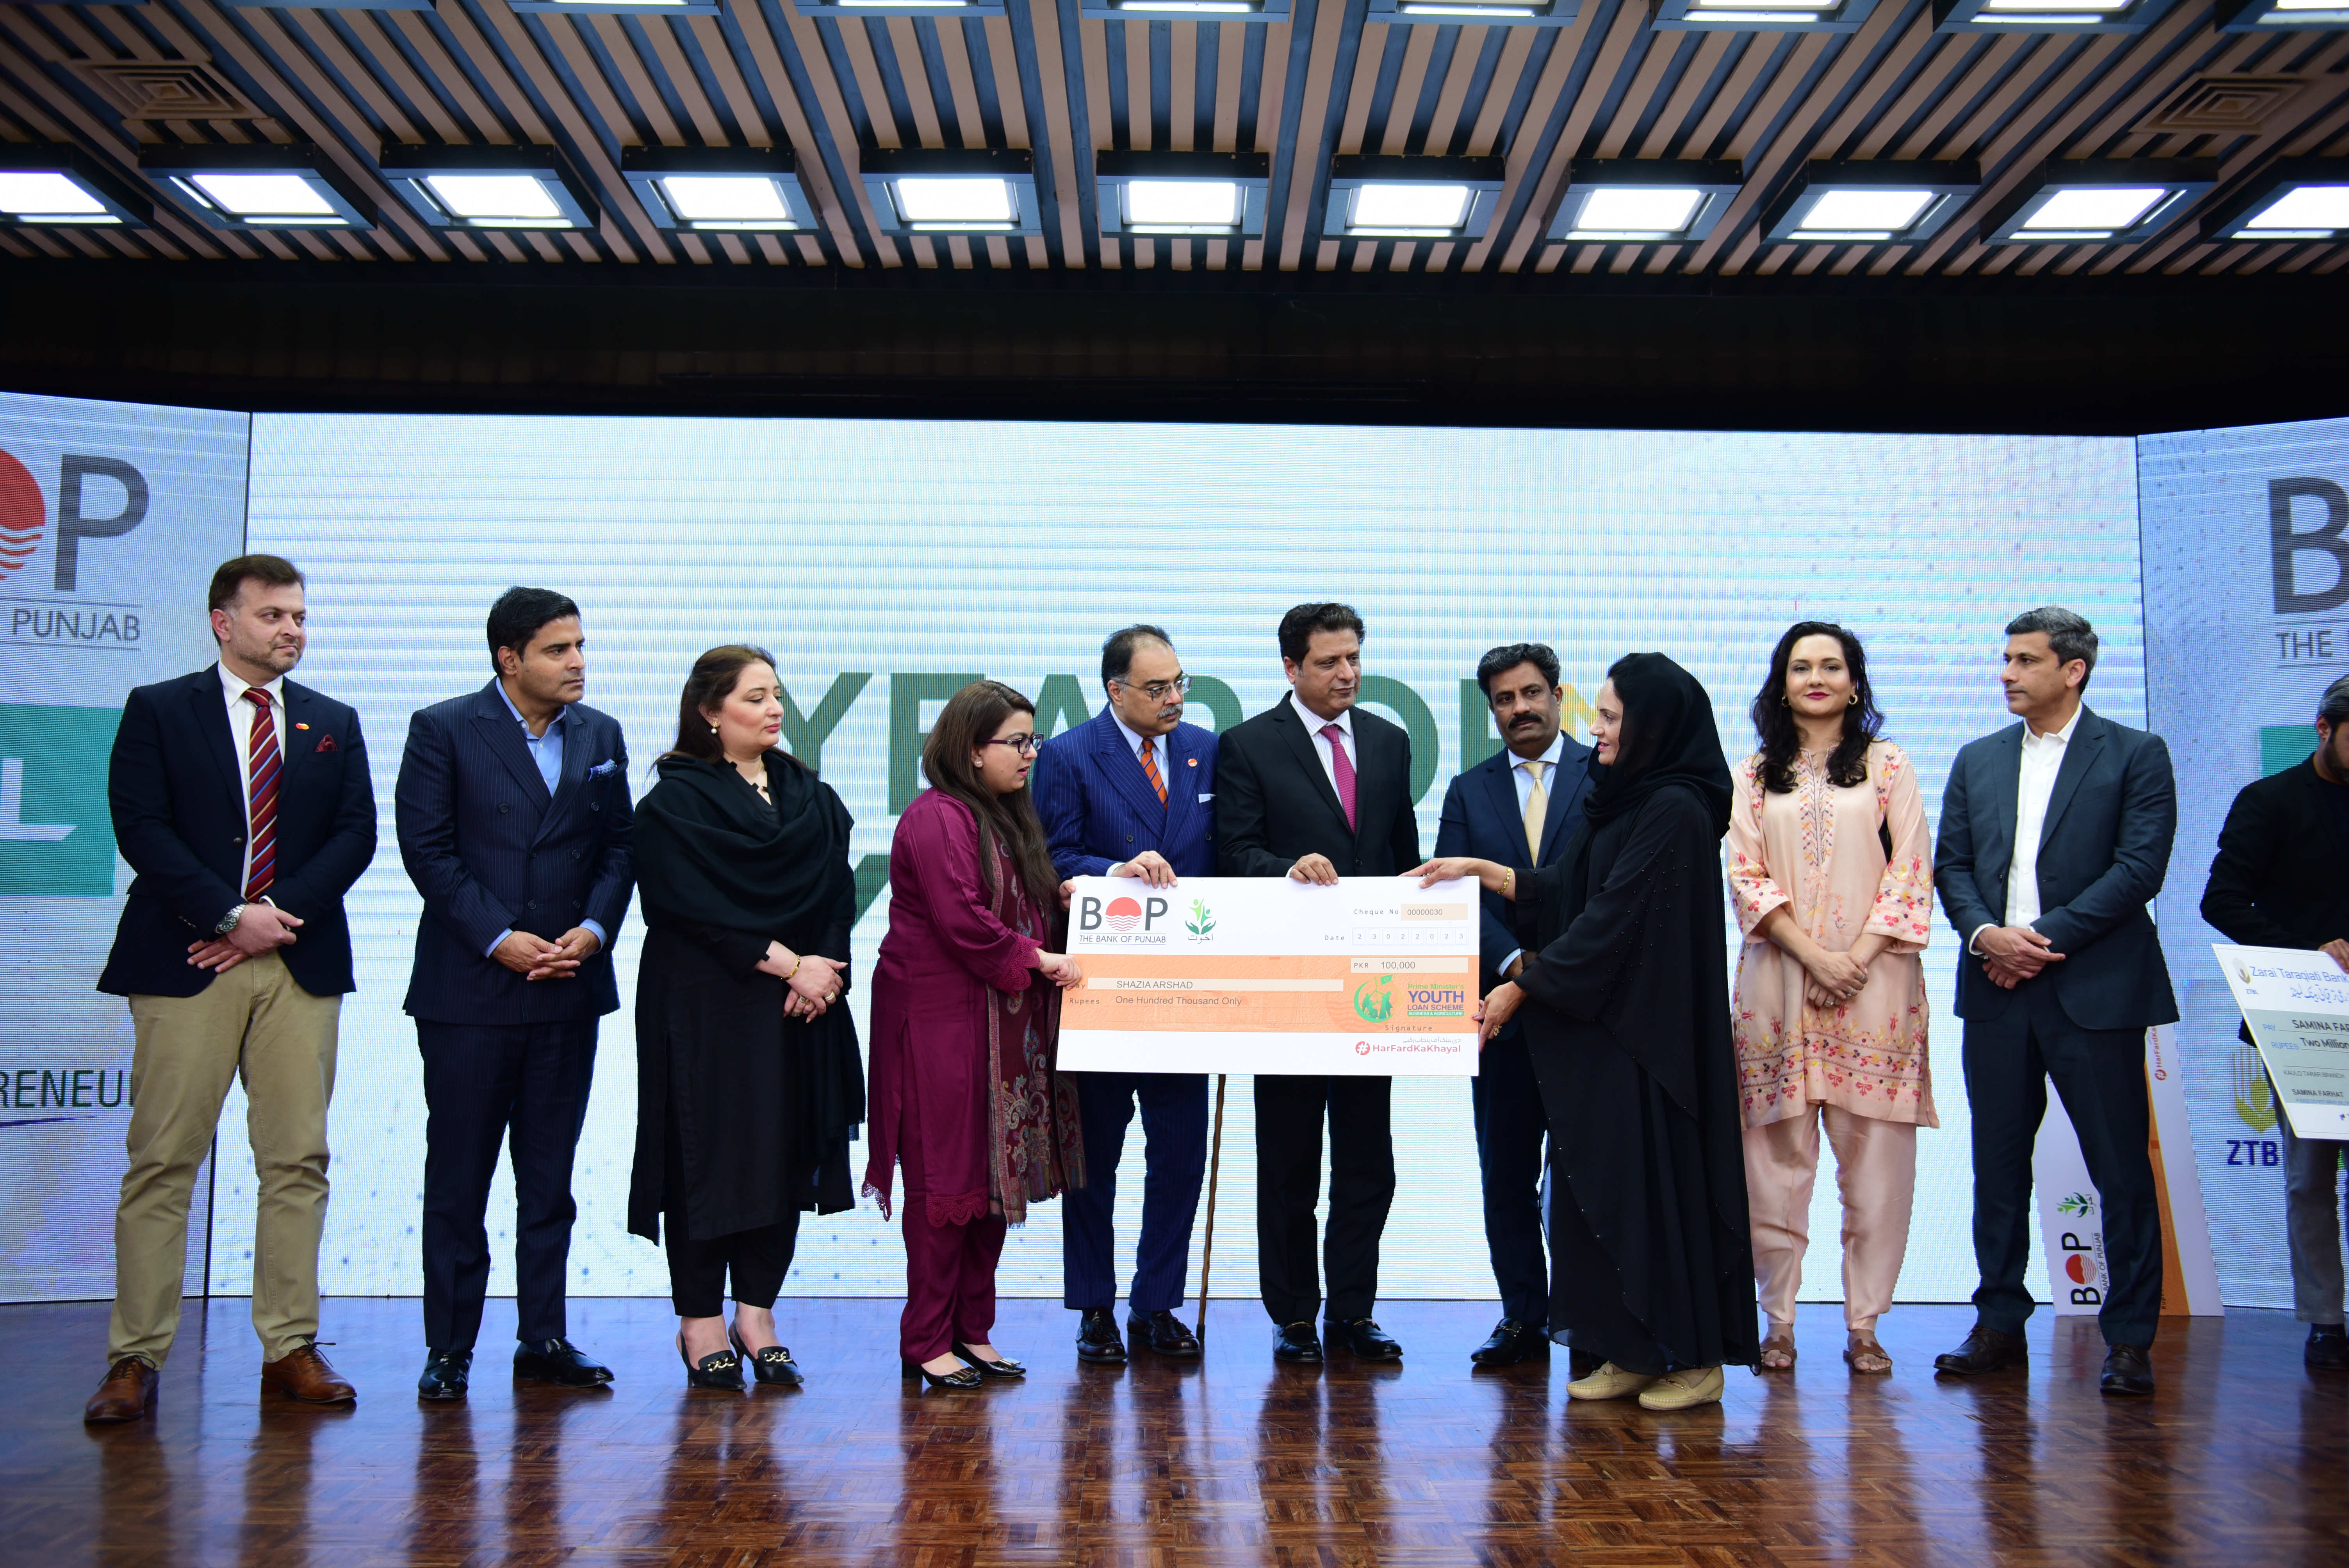 During the Week of Youth organized under the Prime Minister's Youth Program, a check distribution ceremony was held at the Prime Minister's House, in which cheques were distributed to the successful beneficiaries under the Prime Minister's Youth business and agriculture loan Scheme.